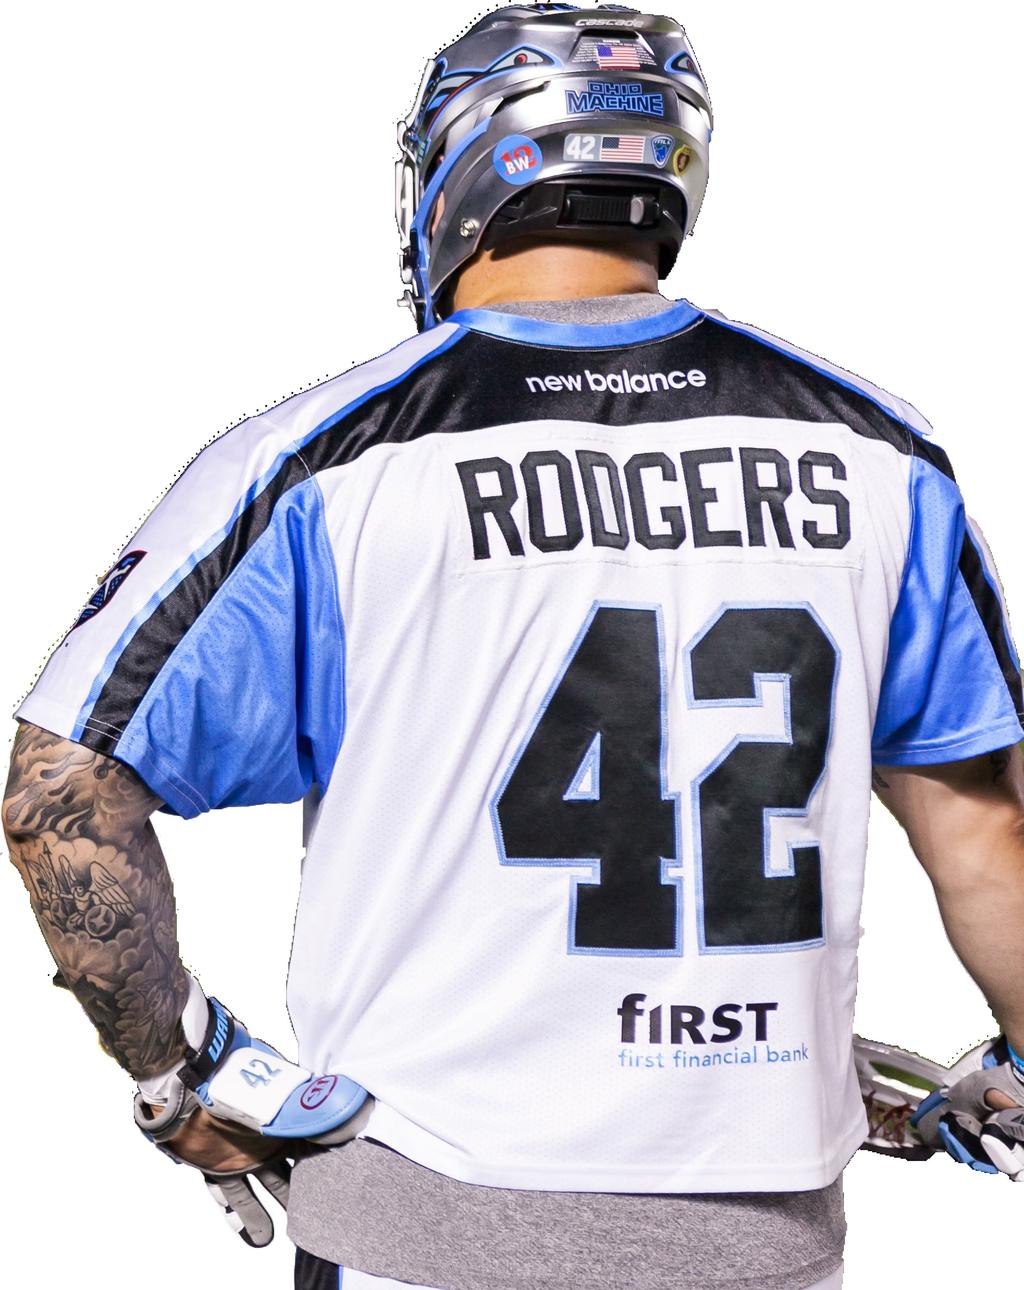 SCOTT RODGERS GOALIE #42 6 4 265 LBS BORN 2/17/87 HOW ACQUIRED: ADDED FROM PLAYER POOL PRIOR TO 2012 SEASON SCOTT AT A GLANCE 2017 MLL SEASON: Went 2-3 in five games played with a 11.13 GAA and a.